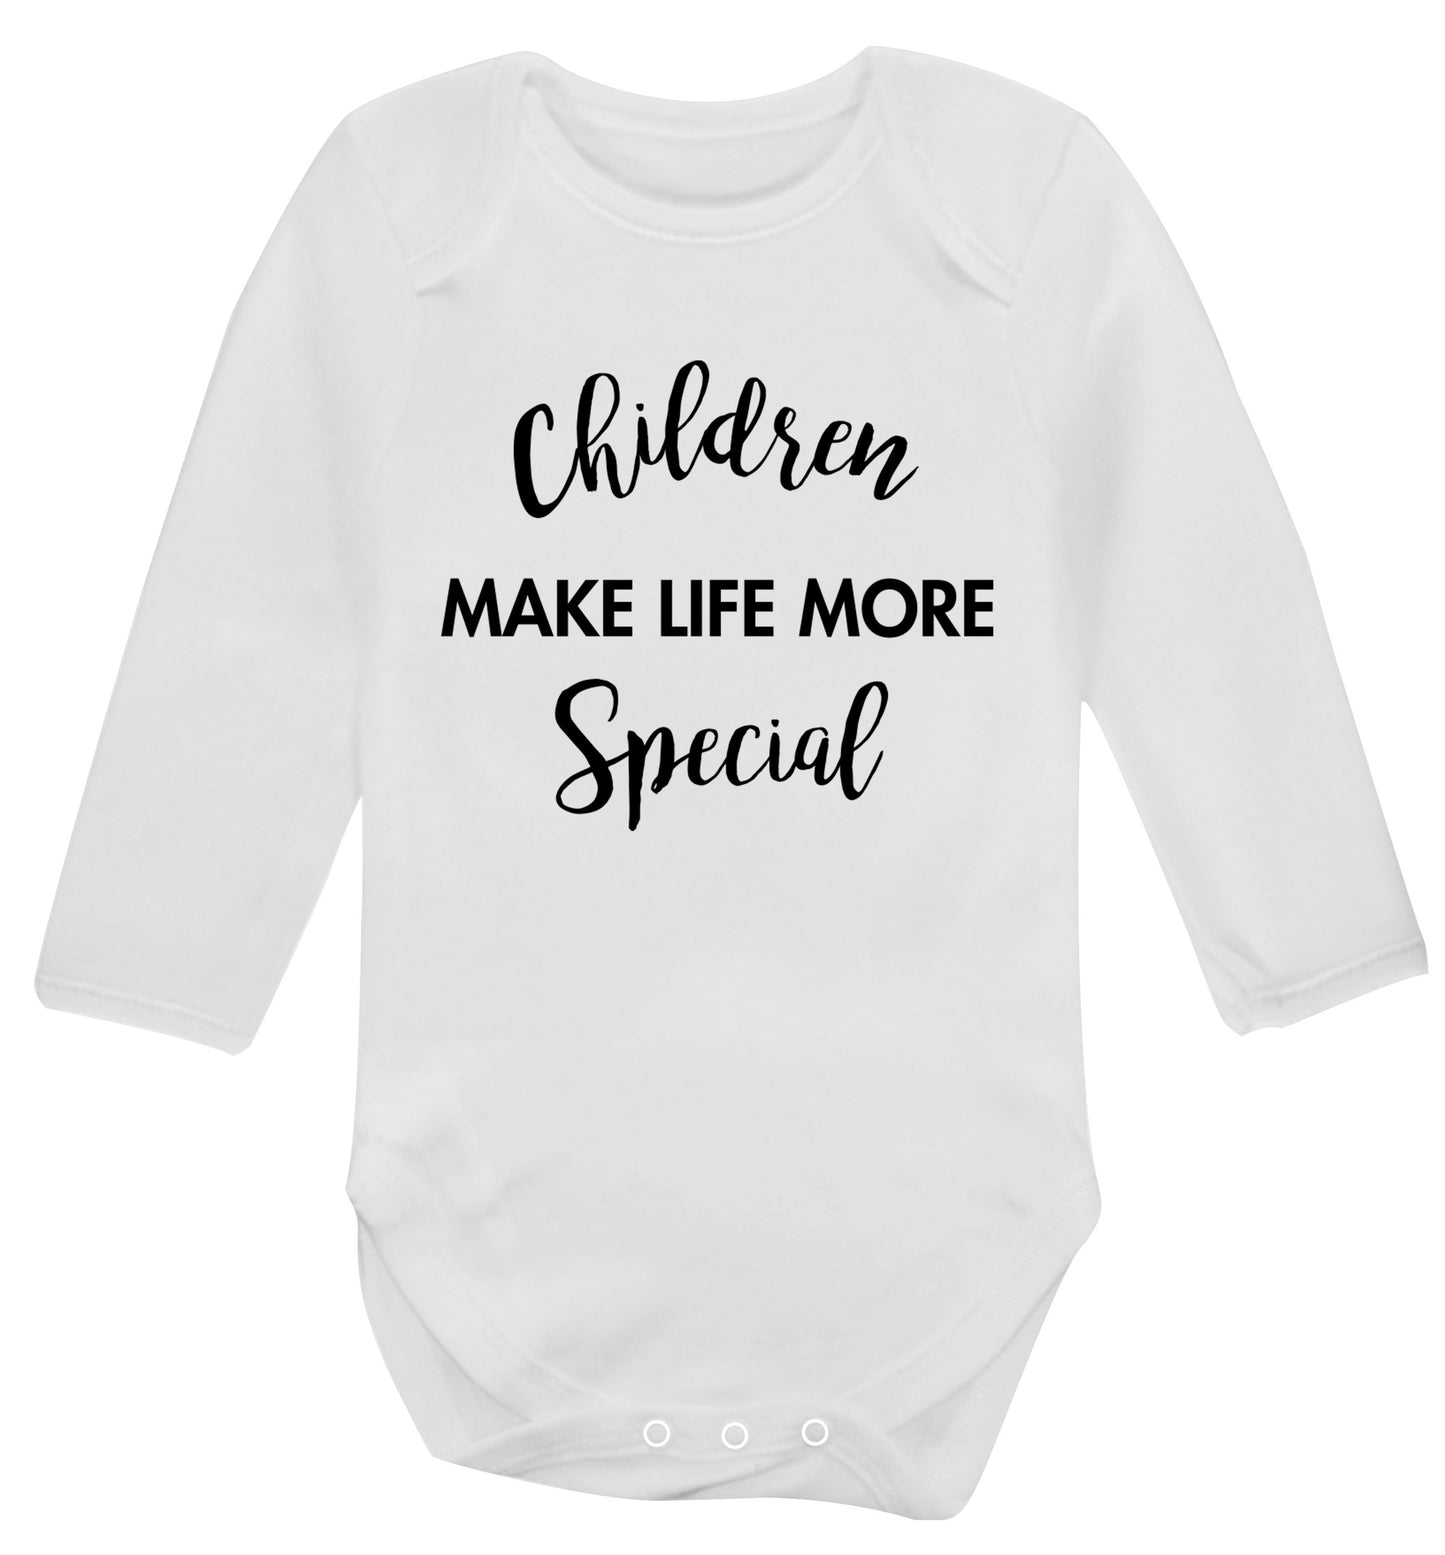 Children make life more special Baby Vest long sleeved white 6-12 months